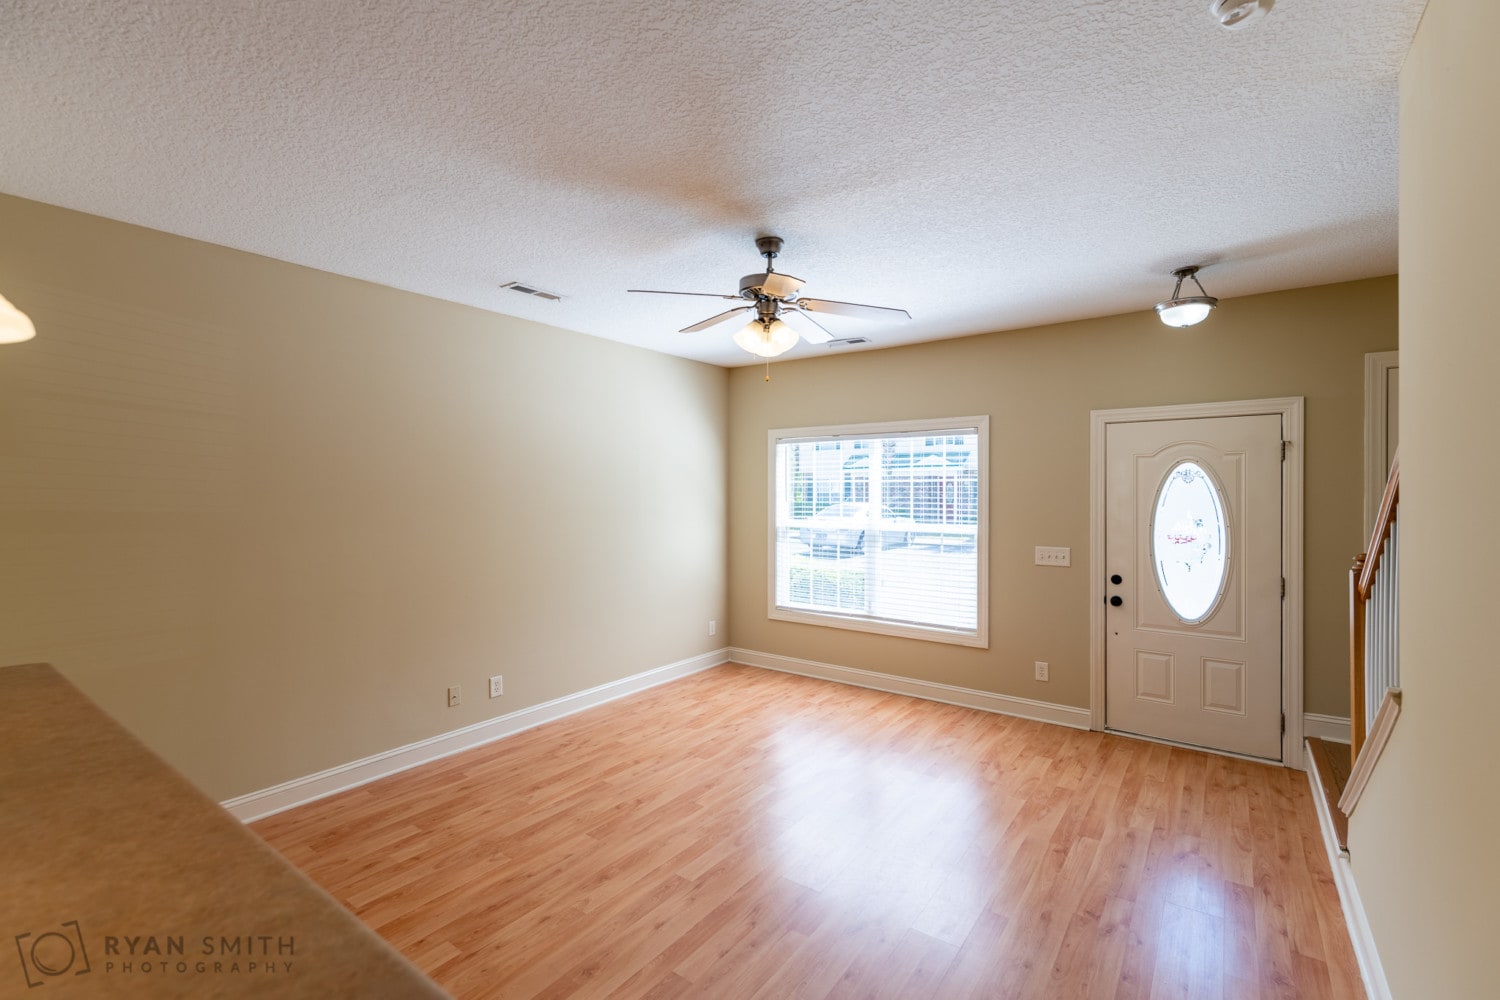 Pictures of The Sinclair apartment unit for A1 Properties - Conway, SC